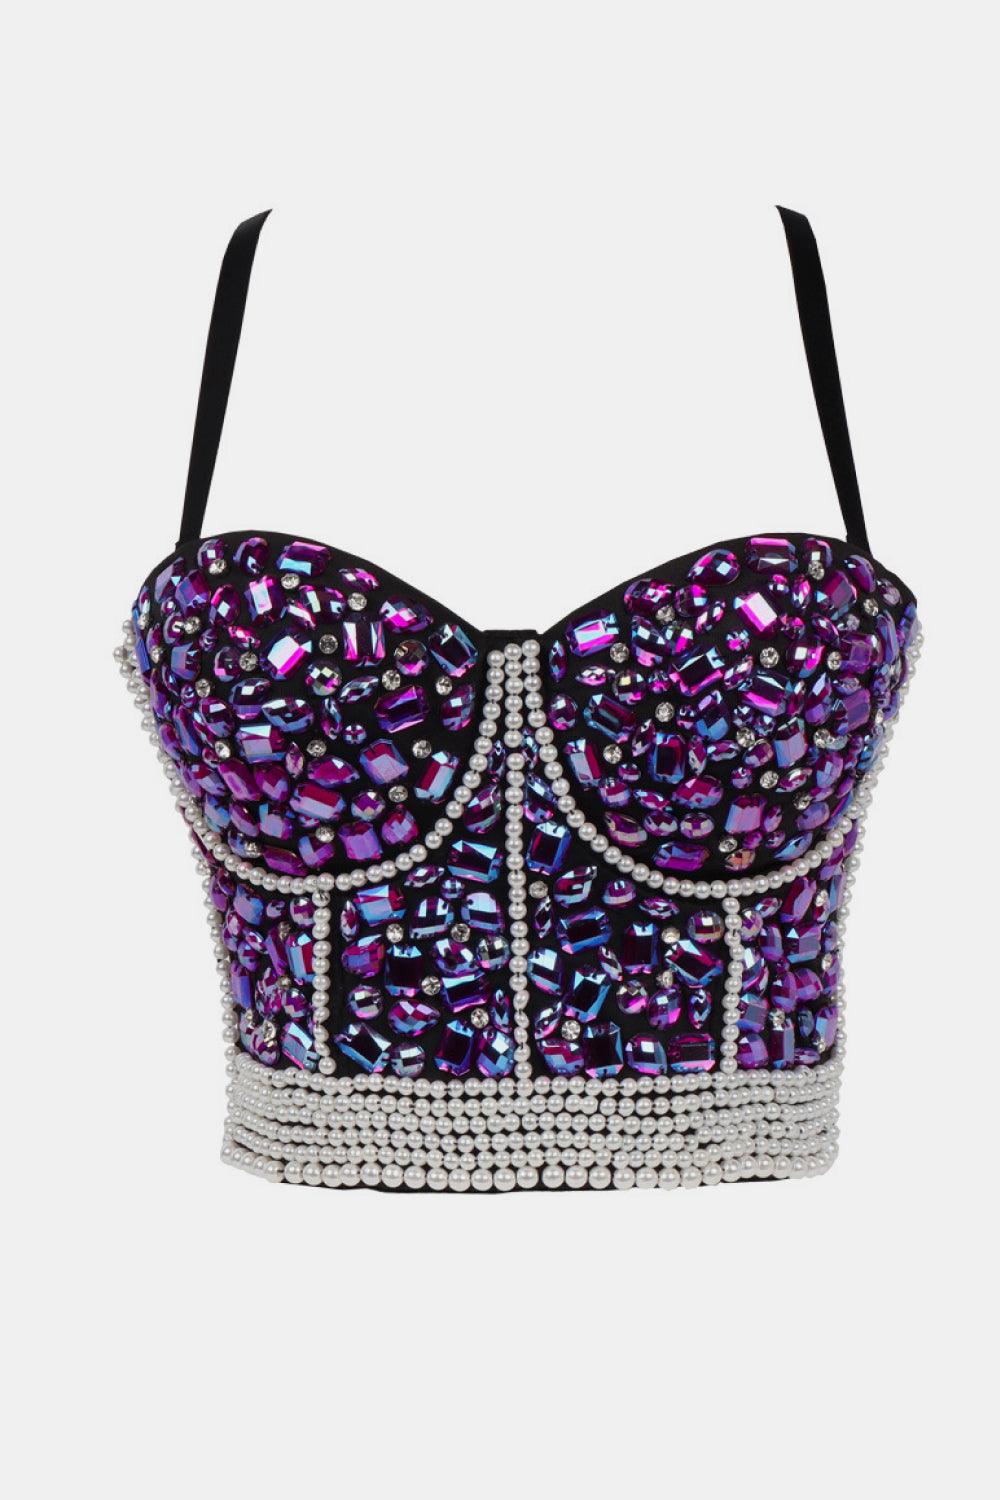 Rhinestone and Faux Pearl Bustier - Rico Goods by Rico Suarez